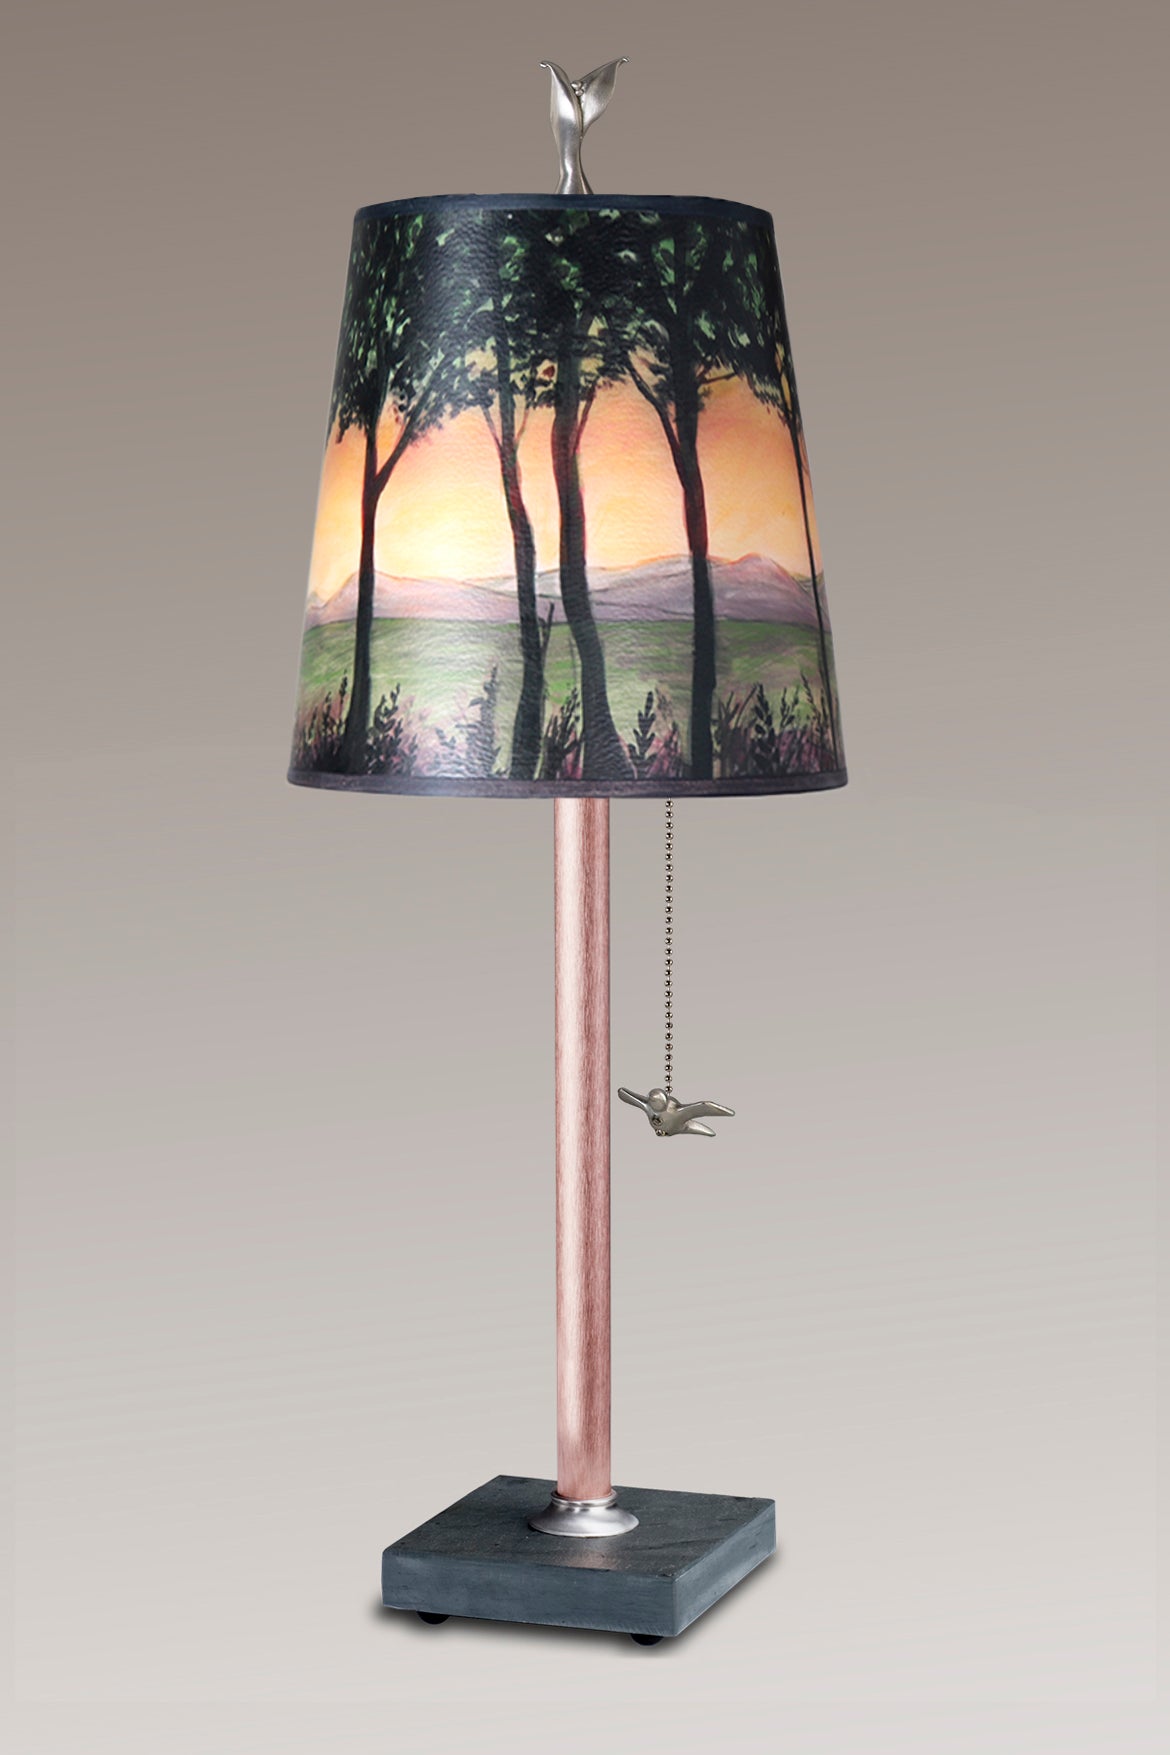 Janna Ugone &amp; Co Table Lamps Copper Table Lamp with Small Drum Shade in Dawn